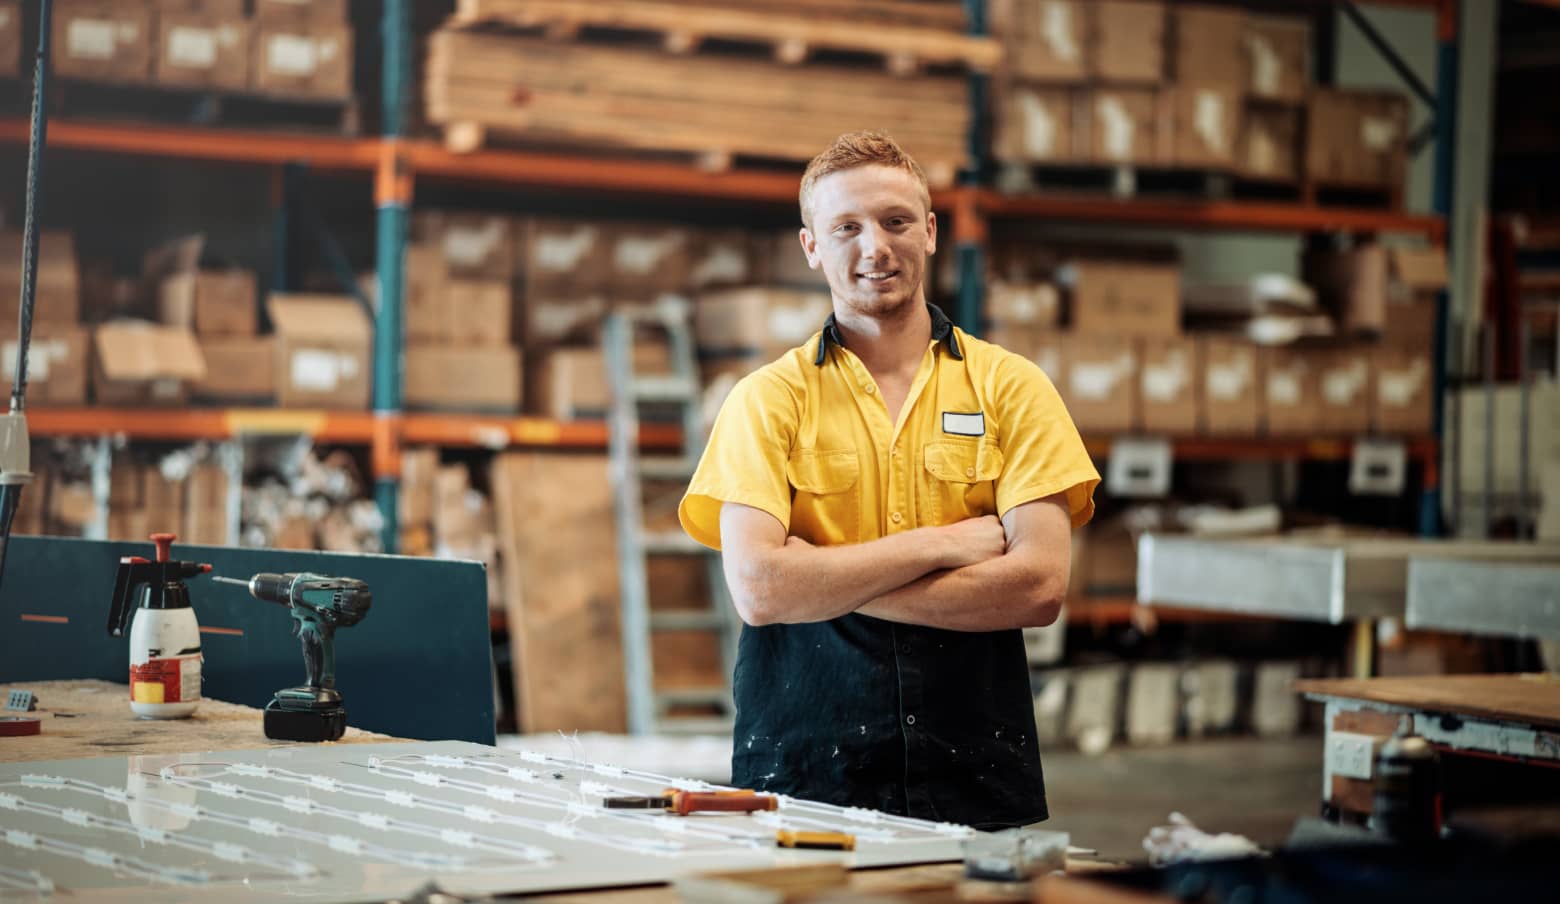 Warehouse worker with arms crossed smiling